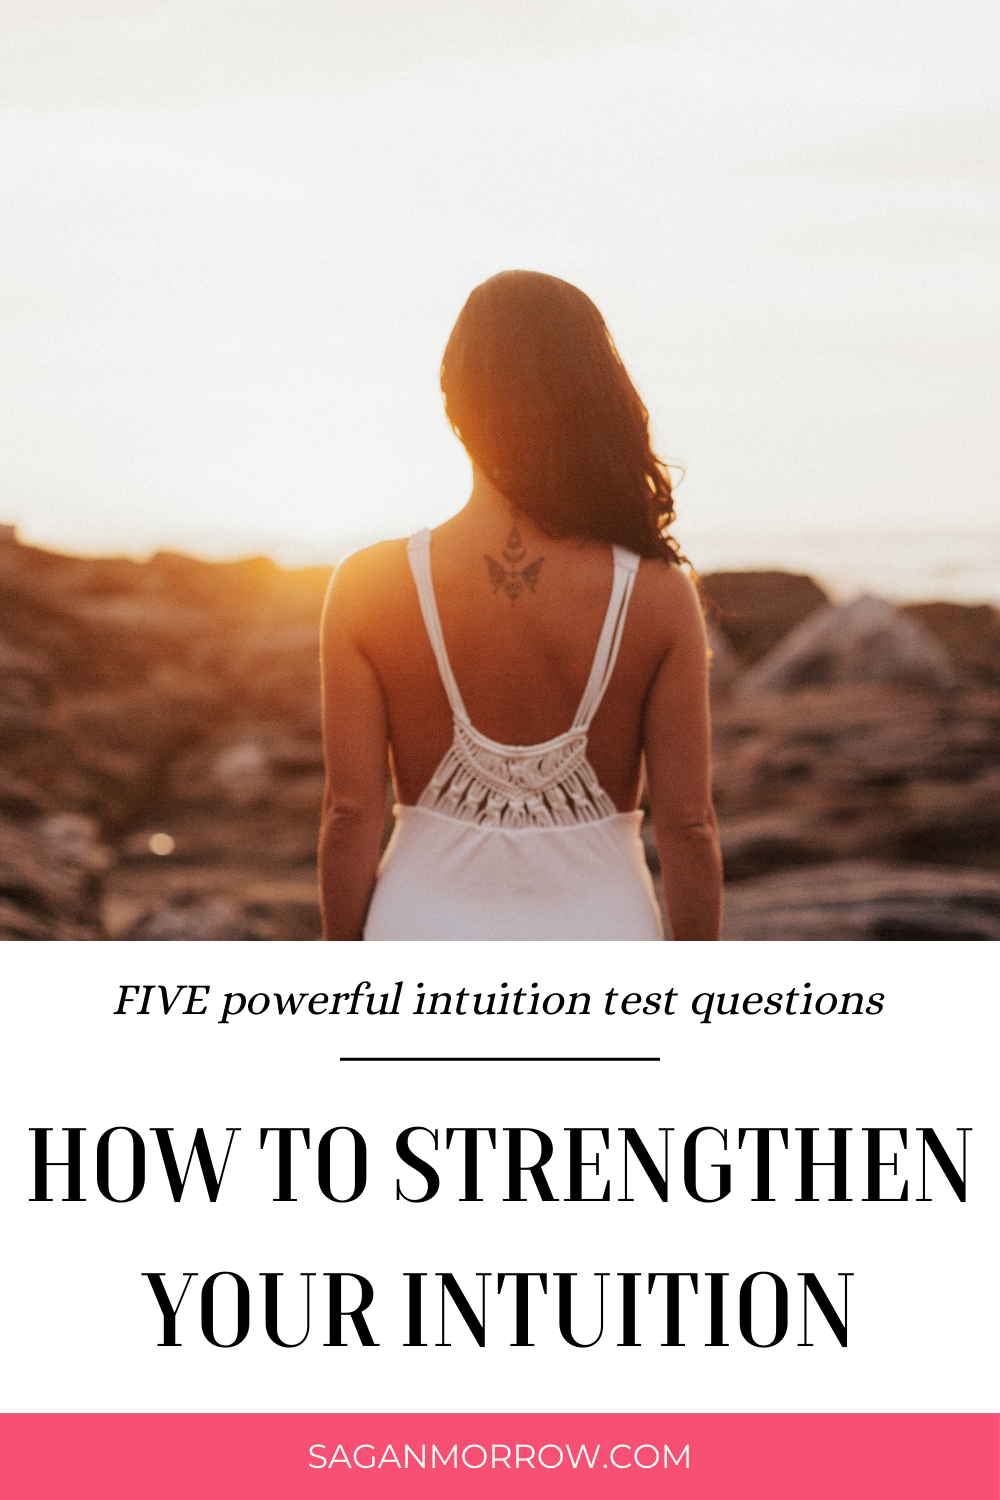 how to strengthen your intuition - 5 powerful intuition test questions